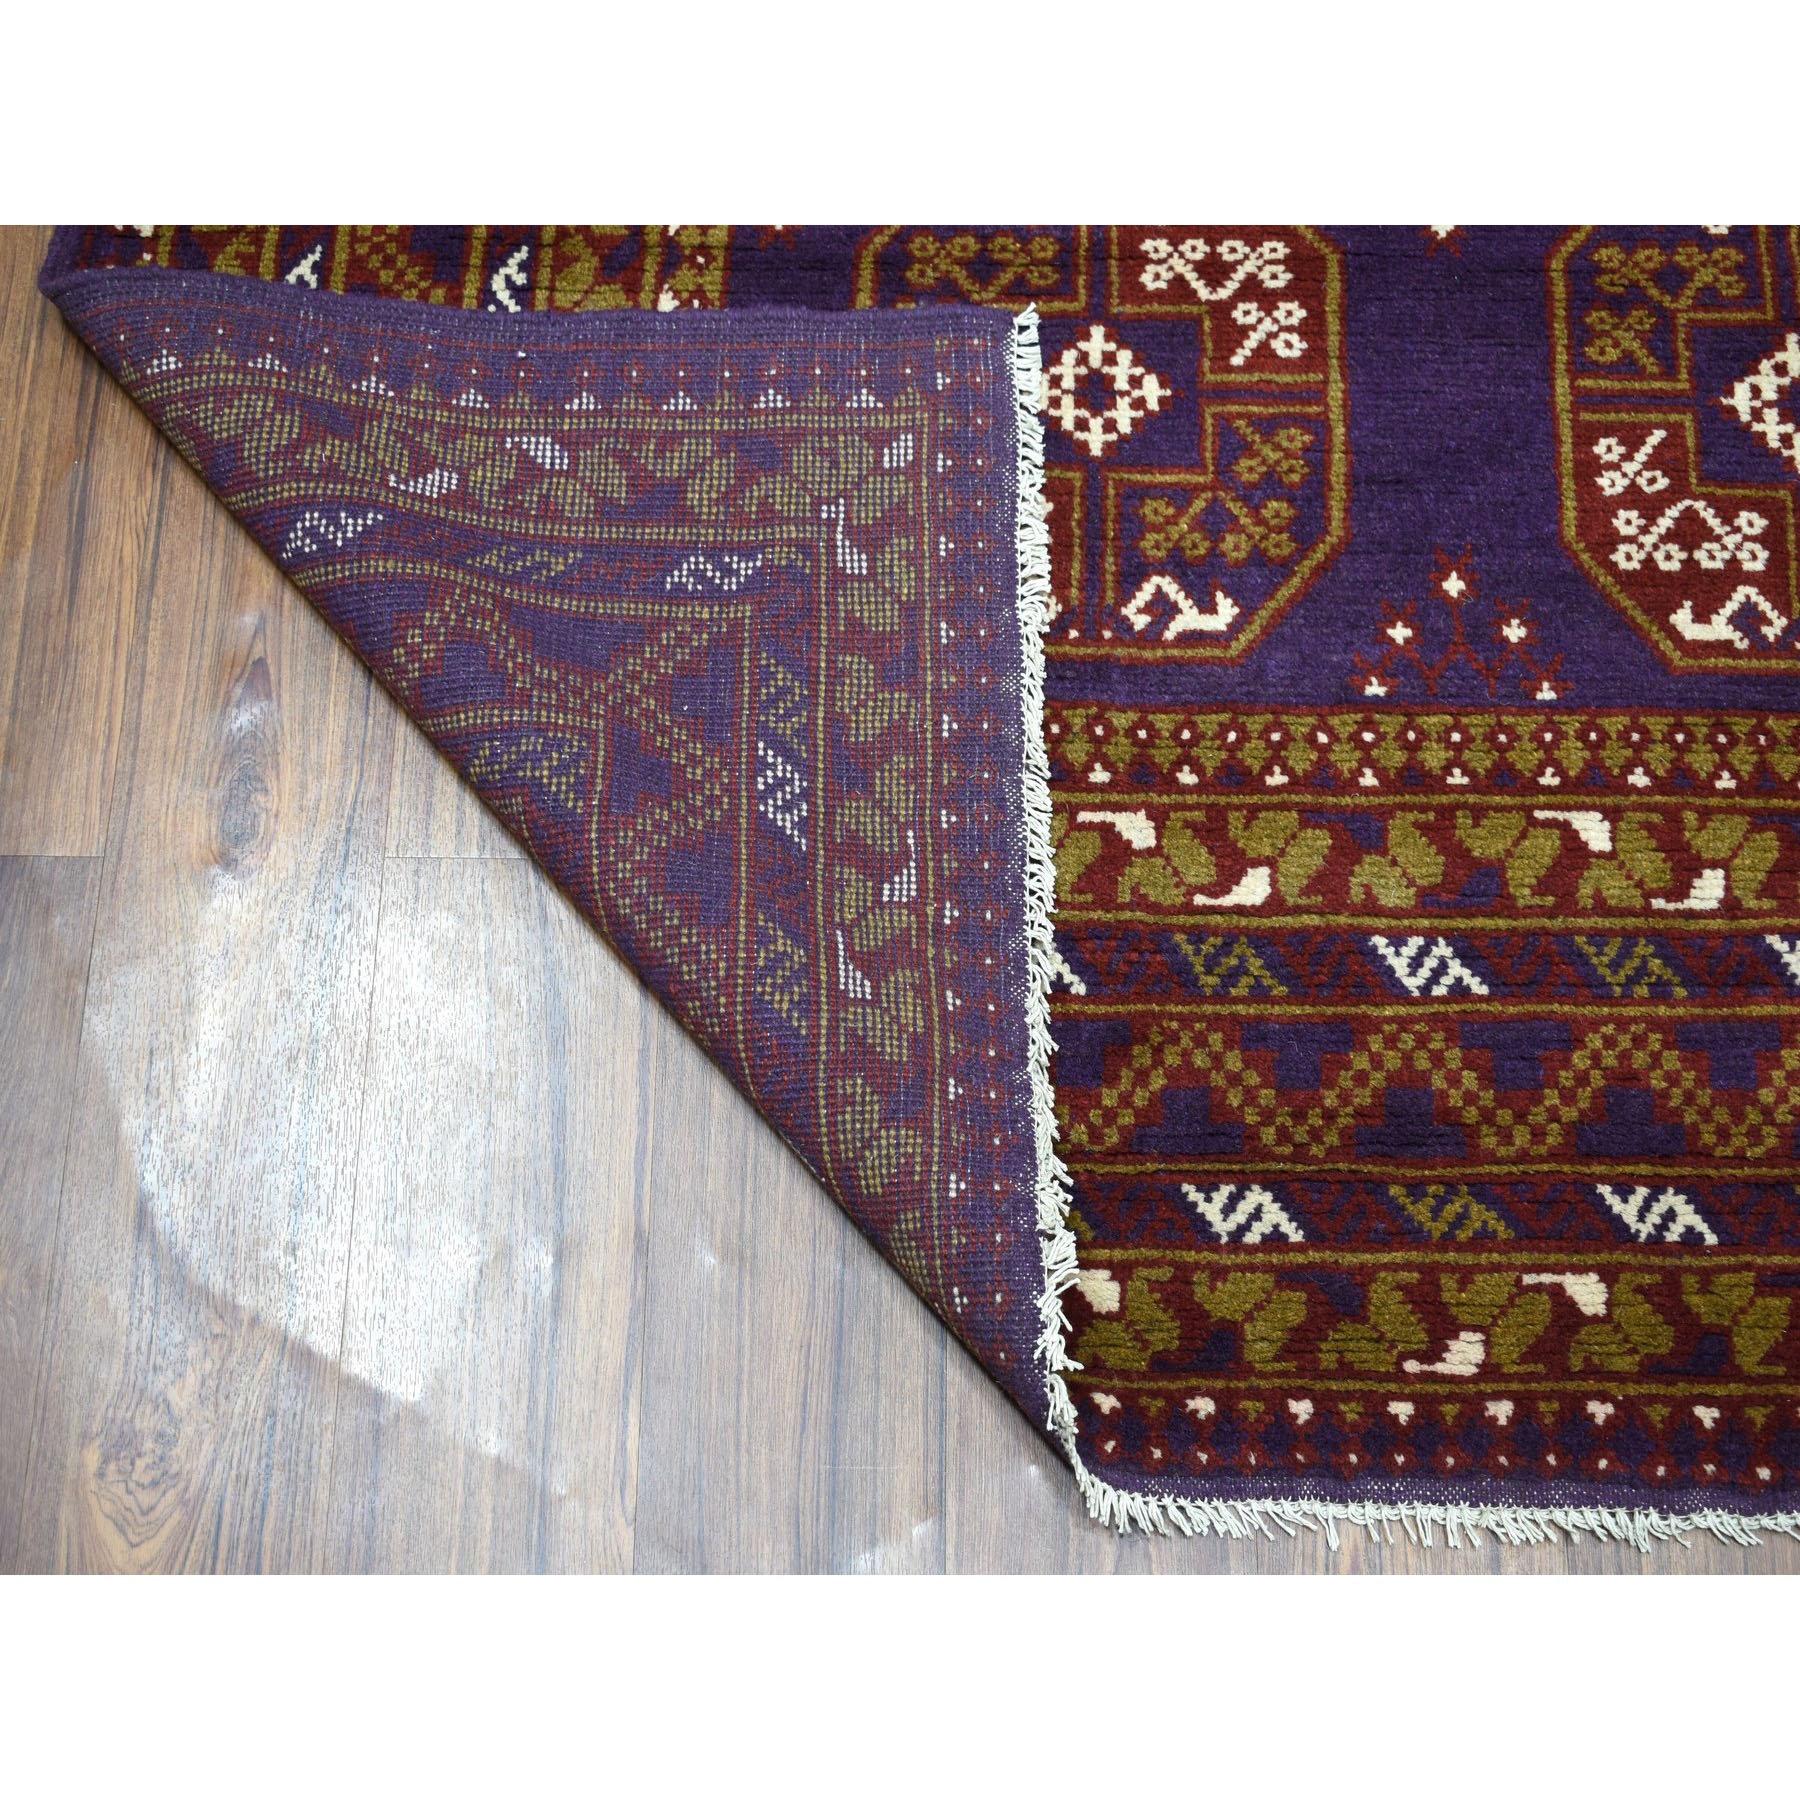 6-8 x9-5  Purple Elephant Feet Design Colorful Afghan Baluch Hand Knotted Pure Wool Oriental Rug 